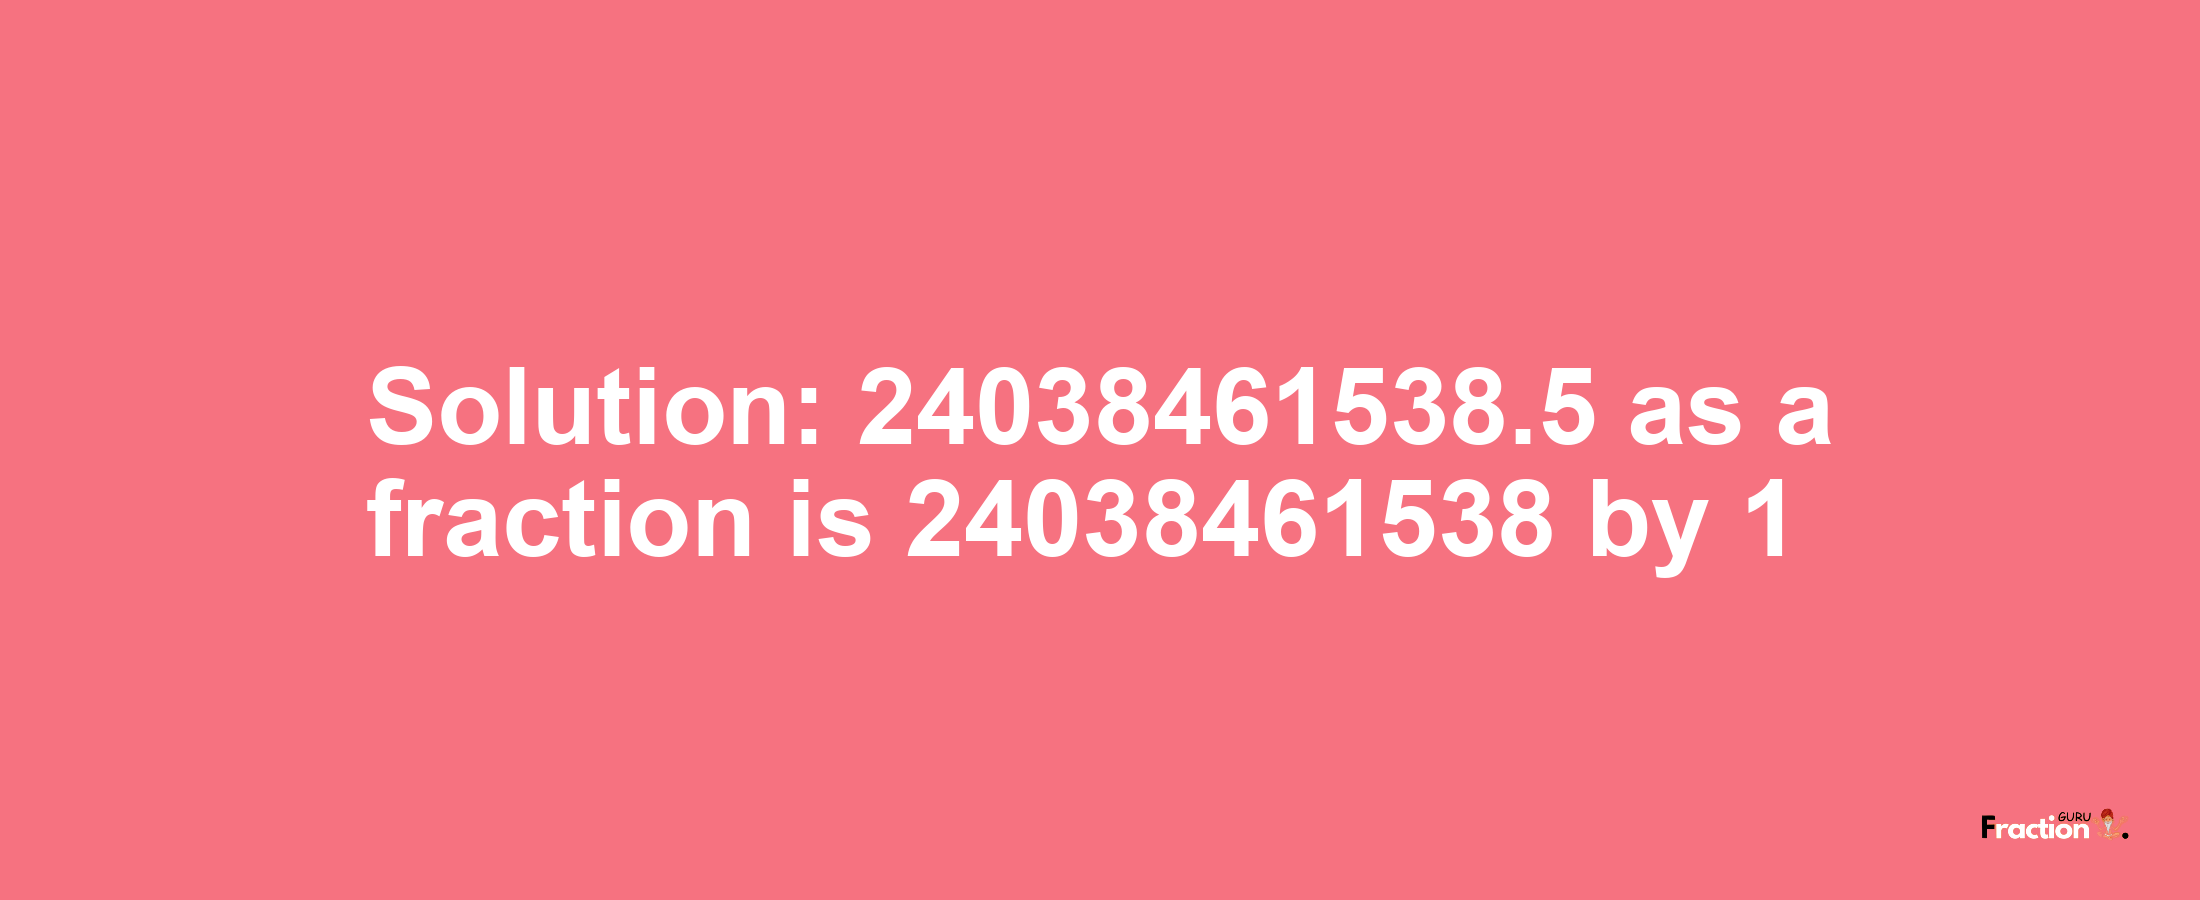 Solution:24038461538.5 as a fraction is 24038461538/1